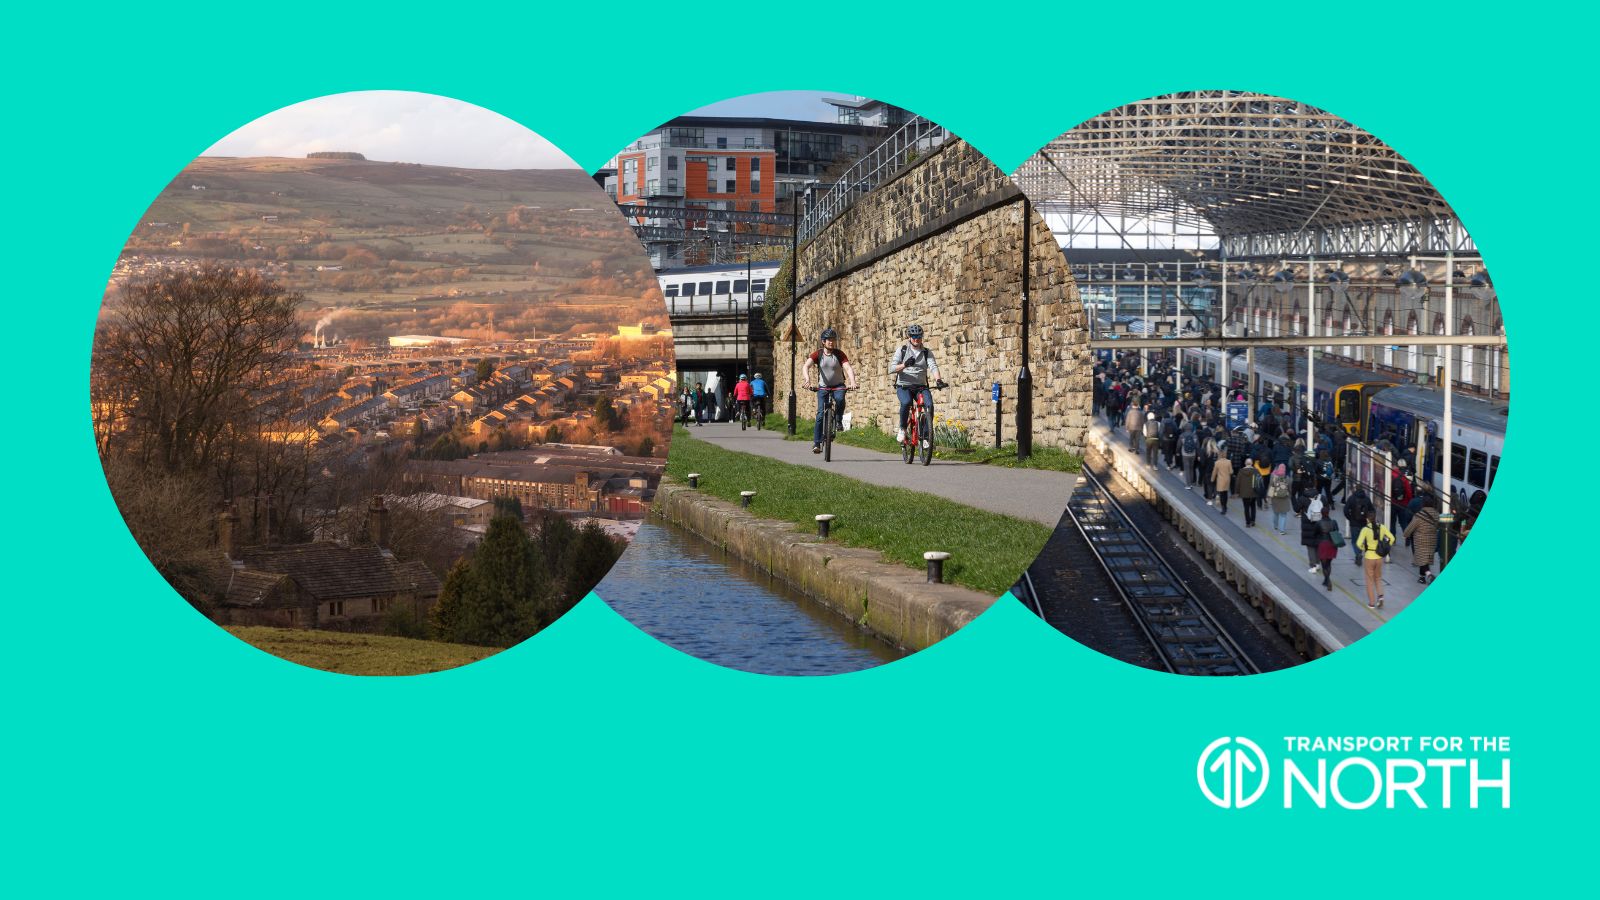 View over Accrington, cyclists in Leeds, and Manchester Piccadilly station